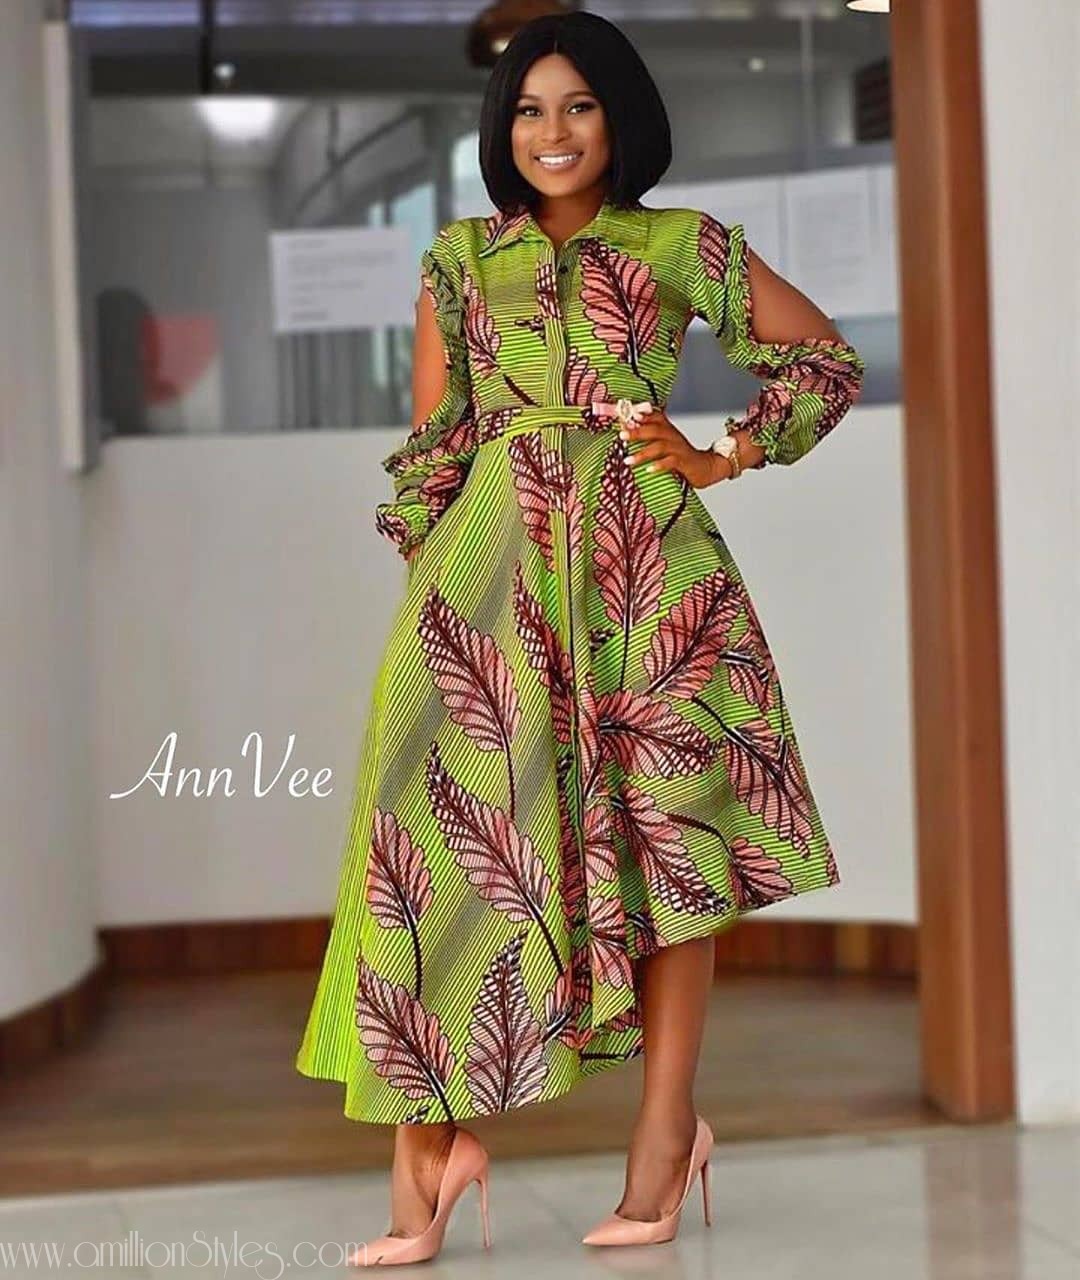 These Ankara Styles Were Made For Friday